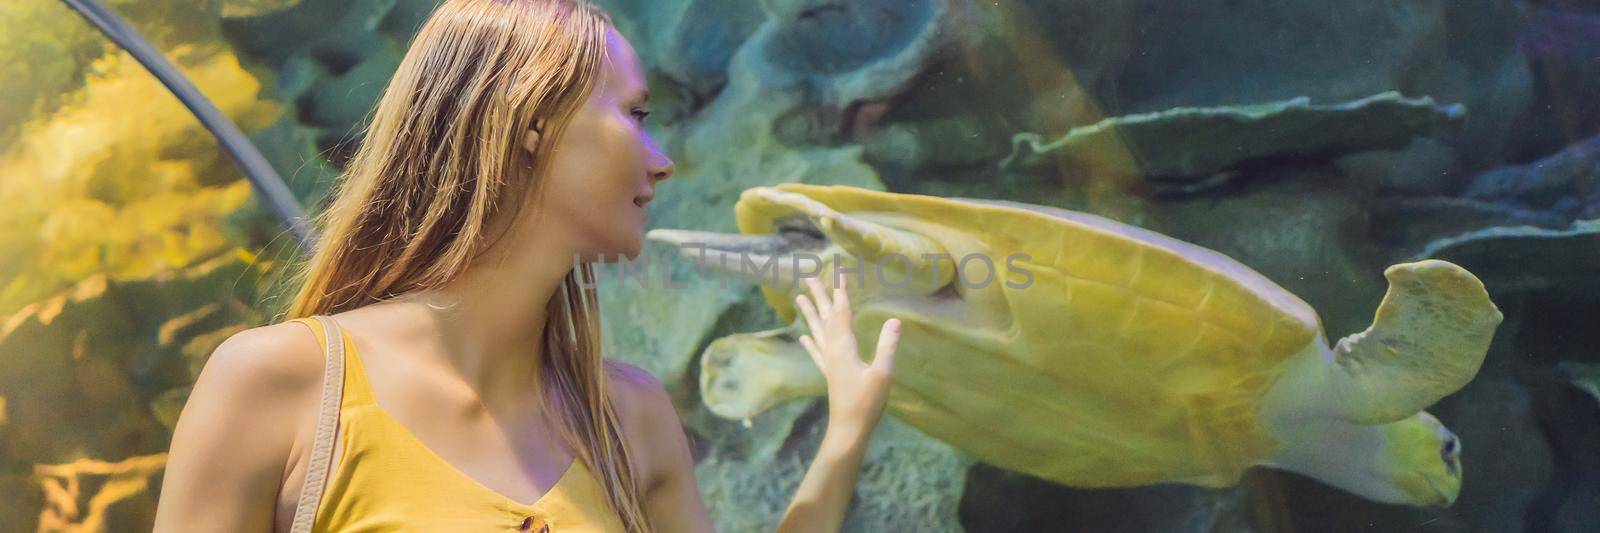 Young woman touches a stingray fish in an oceanarium tunnel. BANNER, LONG FORMAT